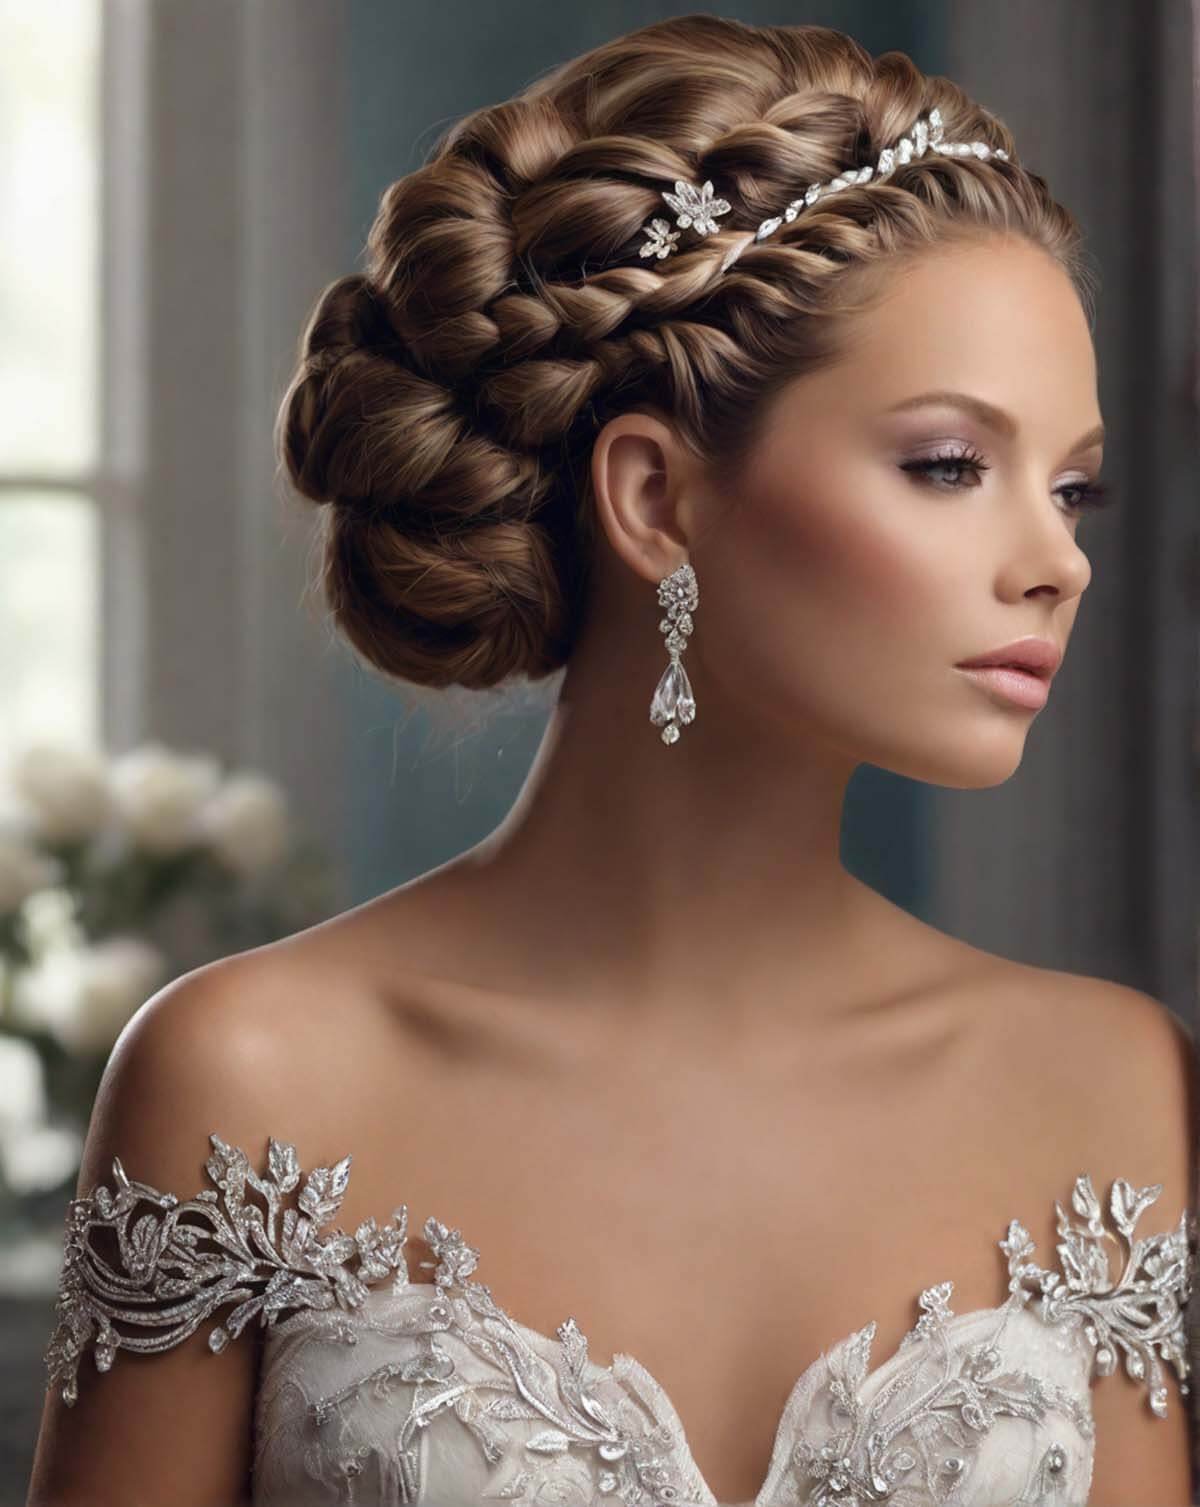 Braided Updo with Jeweled Accessories